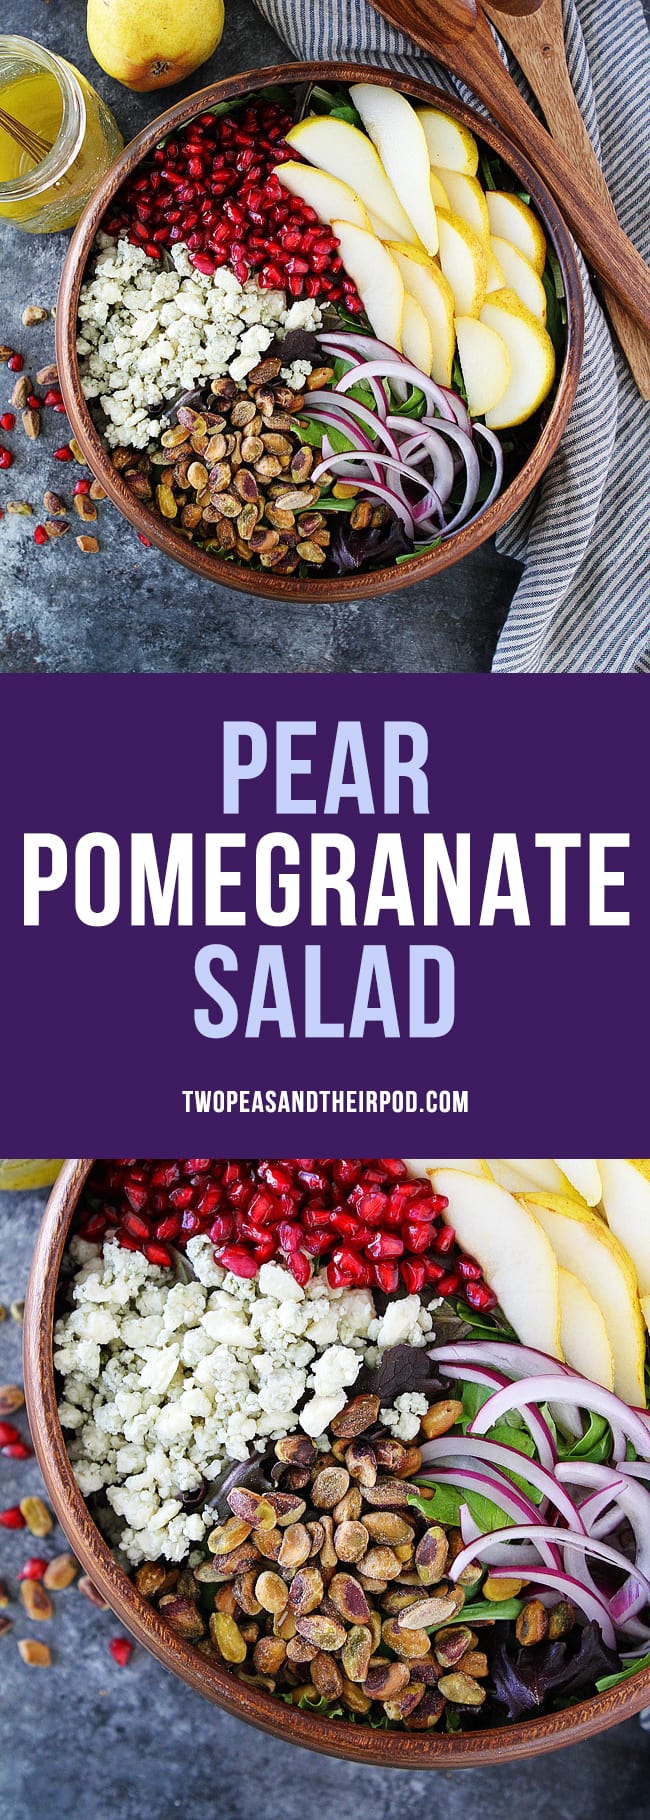 Pear Pomegranate Salad is the perfect salad for the holidays! It goes great with any meal! #salad #pear #pomegranate #holidays #glutenfree #vegetarian